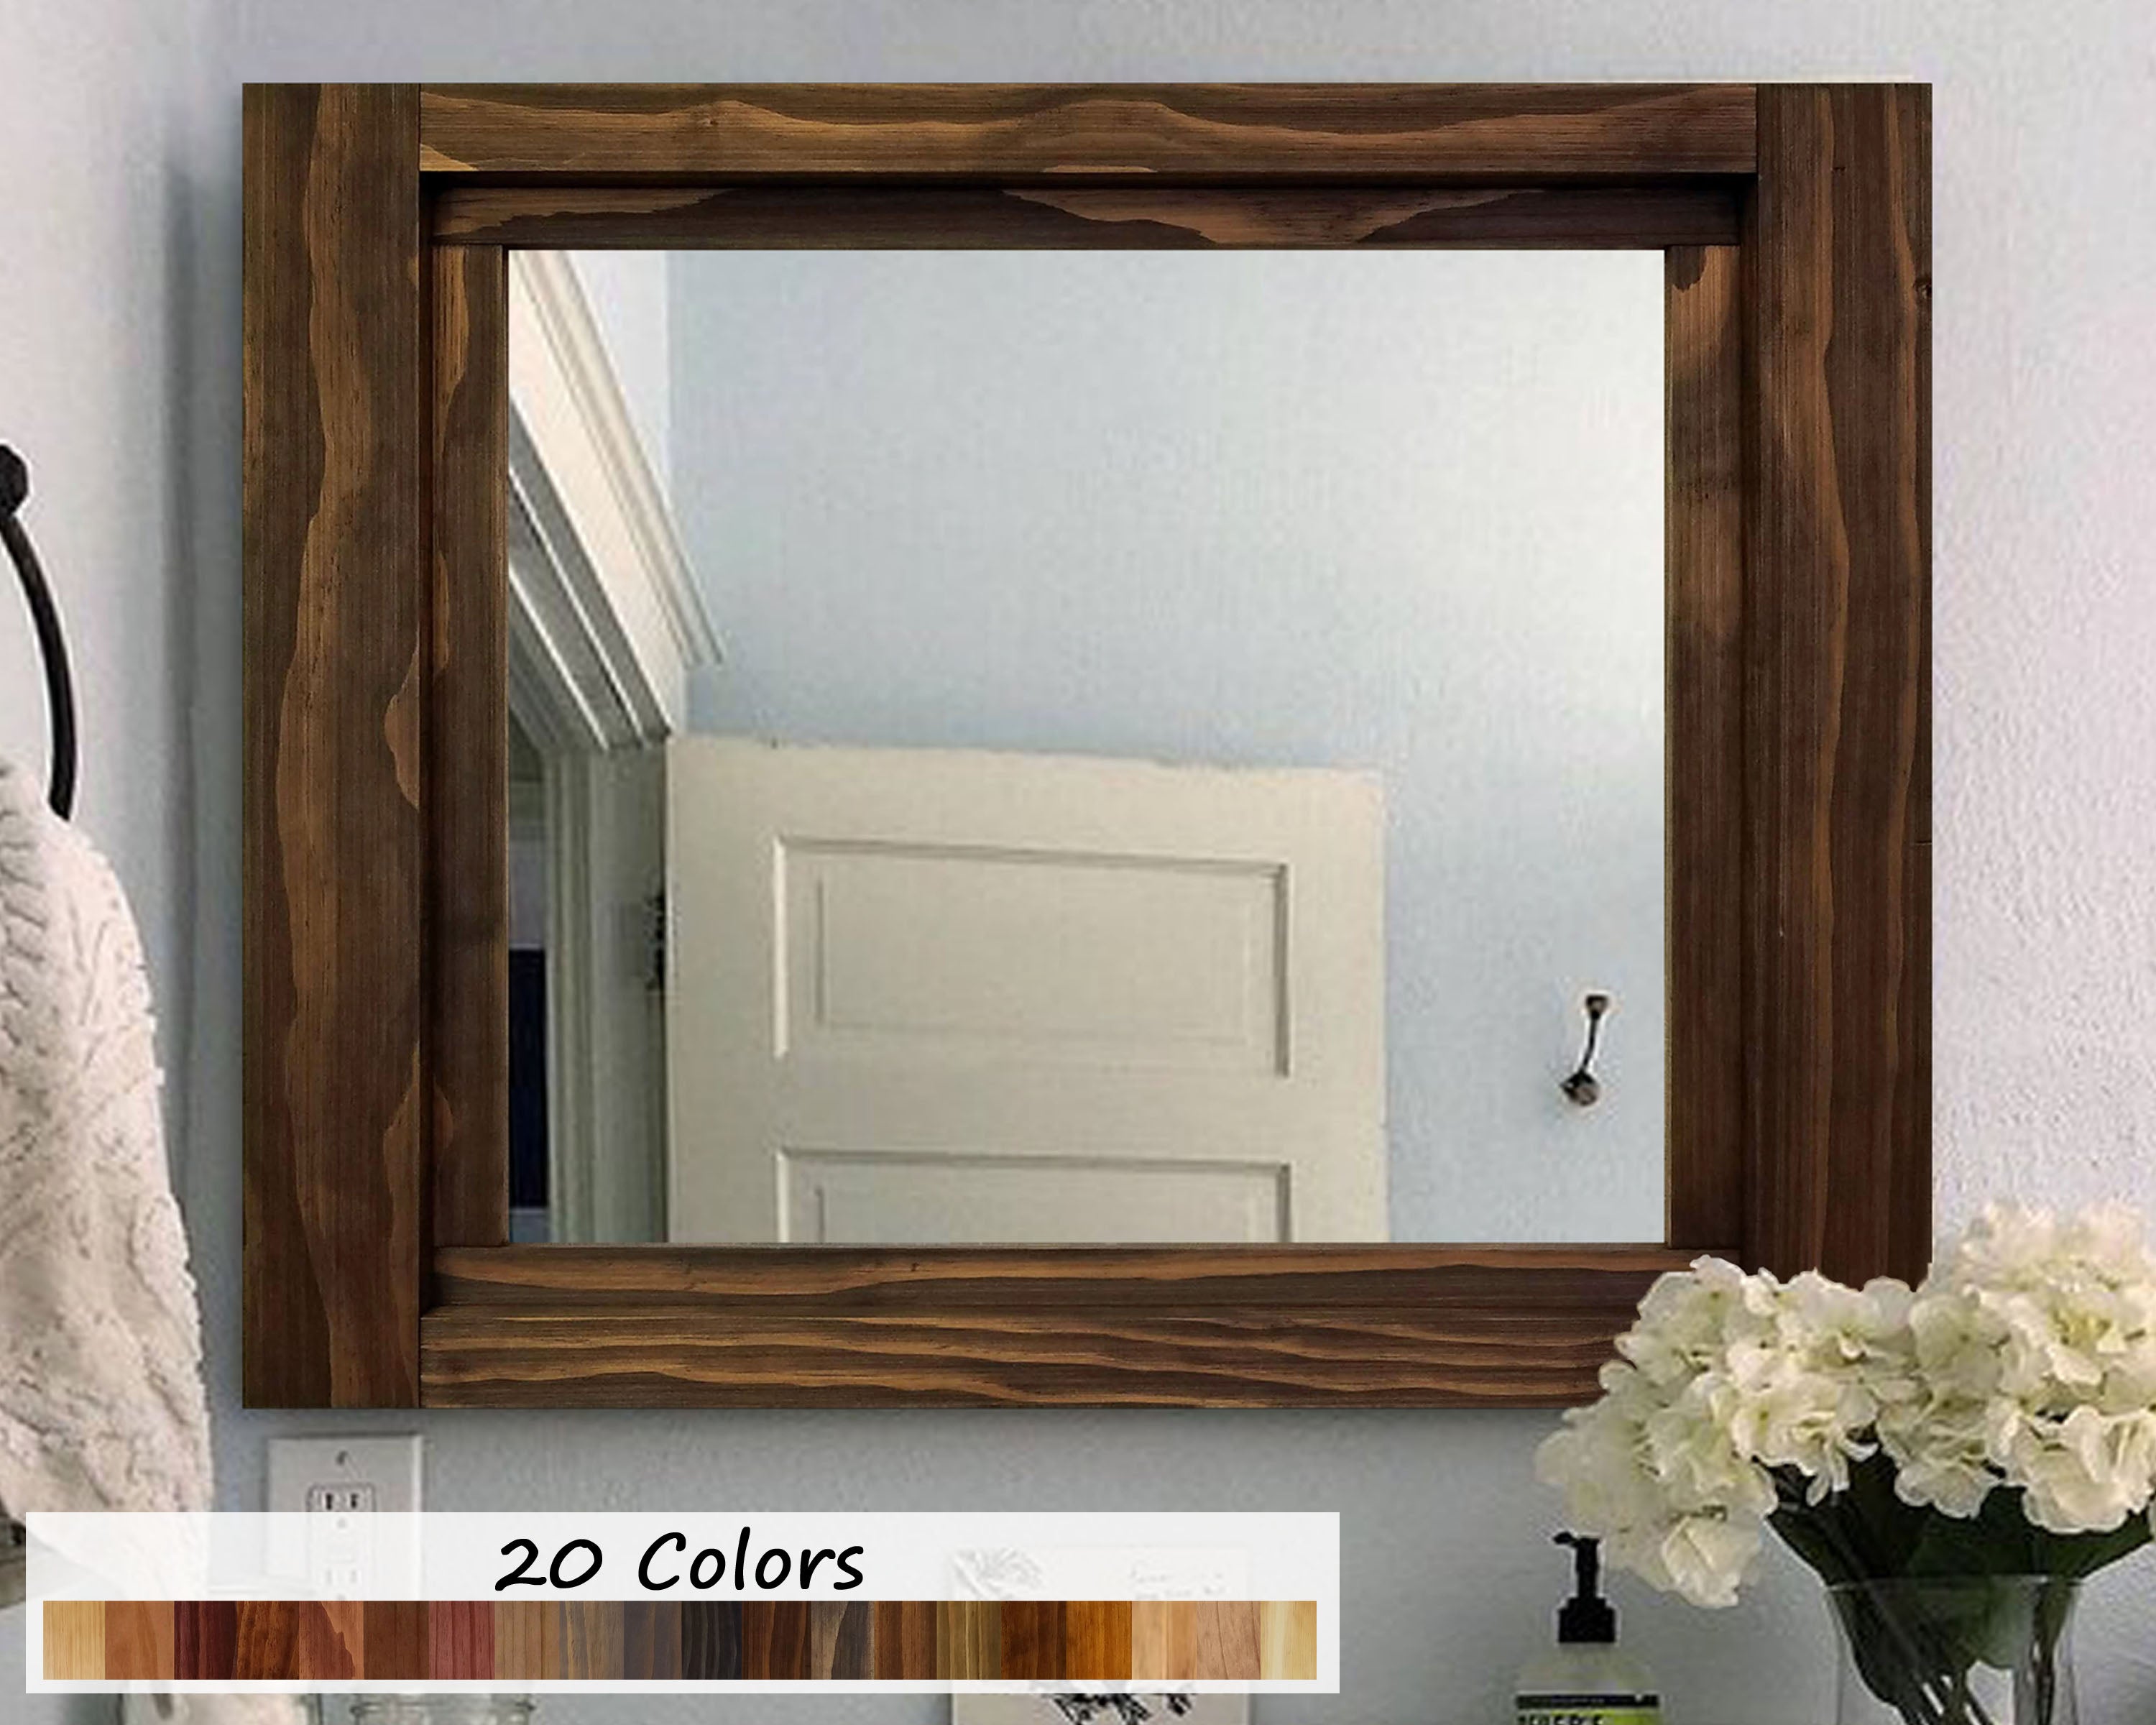 Farmhouse Framed Wall Mirror, 5 Sizes & 20 Colors by Lane of Lenore